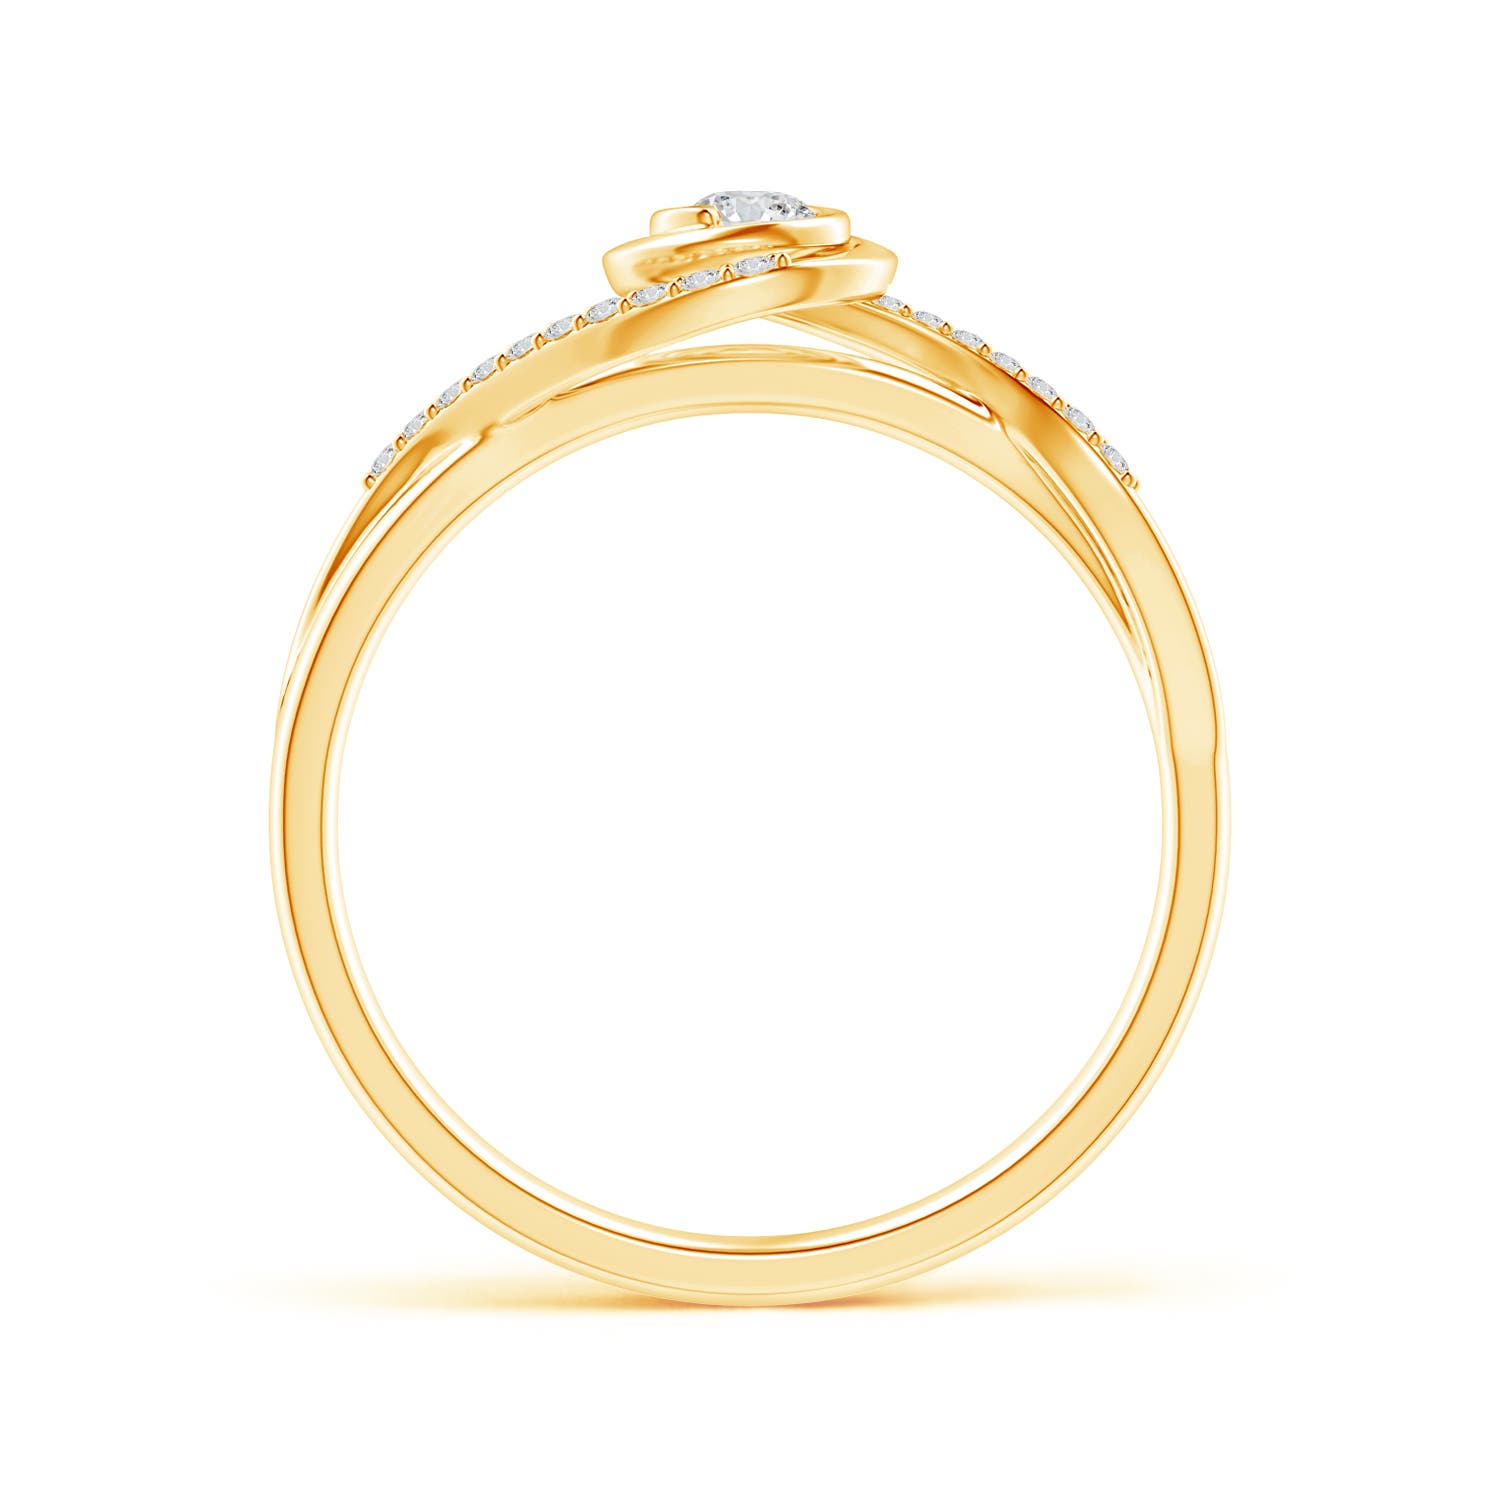 H, SI2 / 0.19 CT / 14 KT Yellow Gold